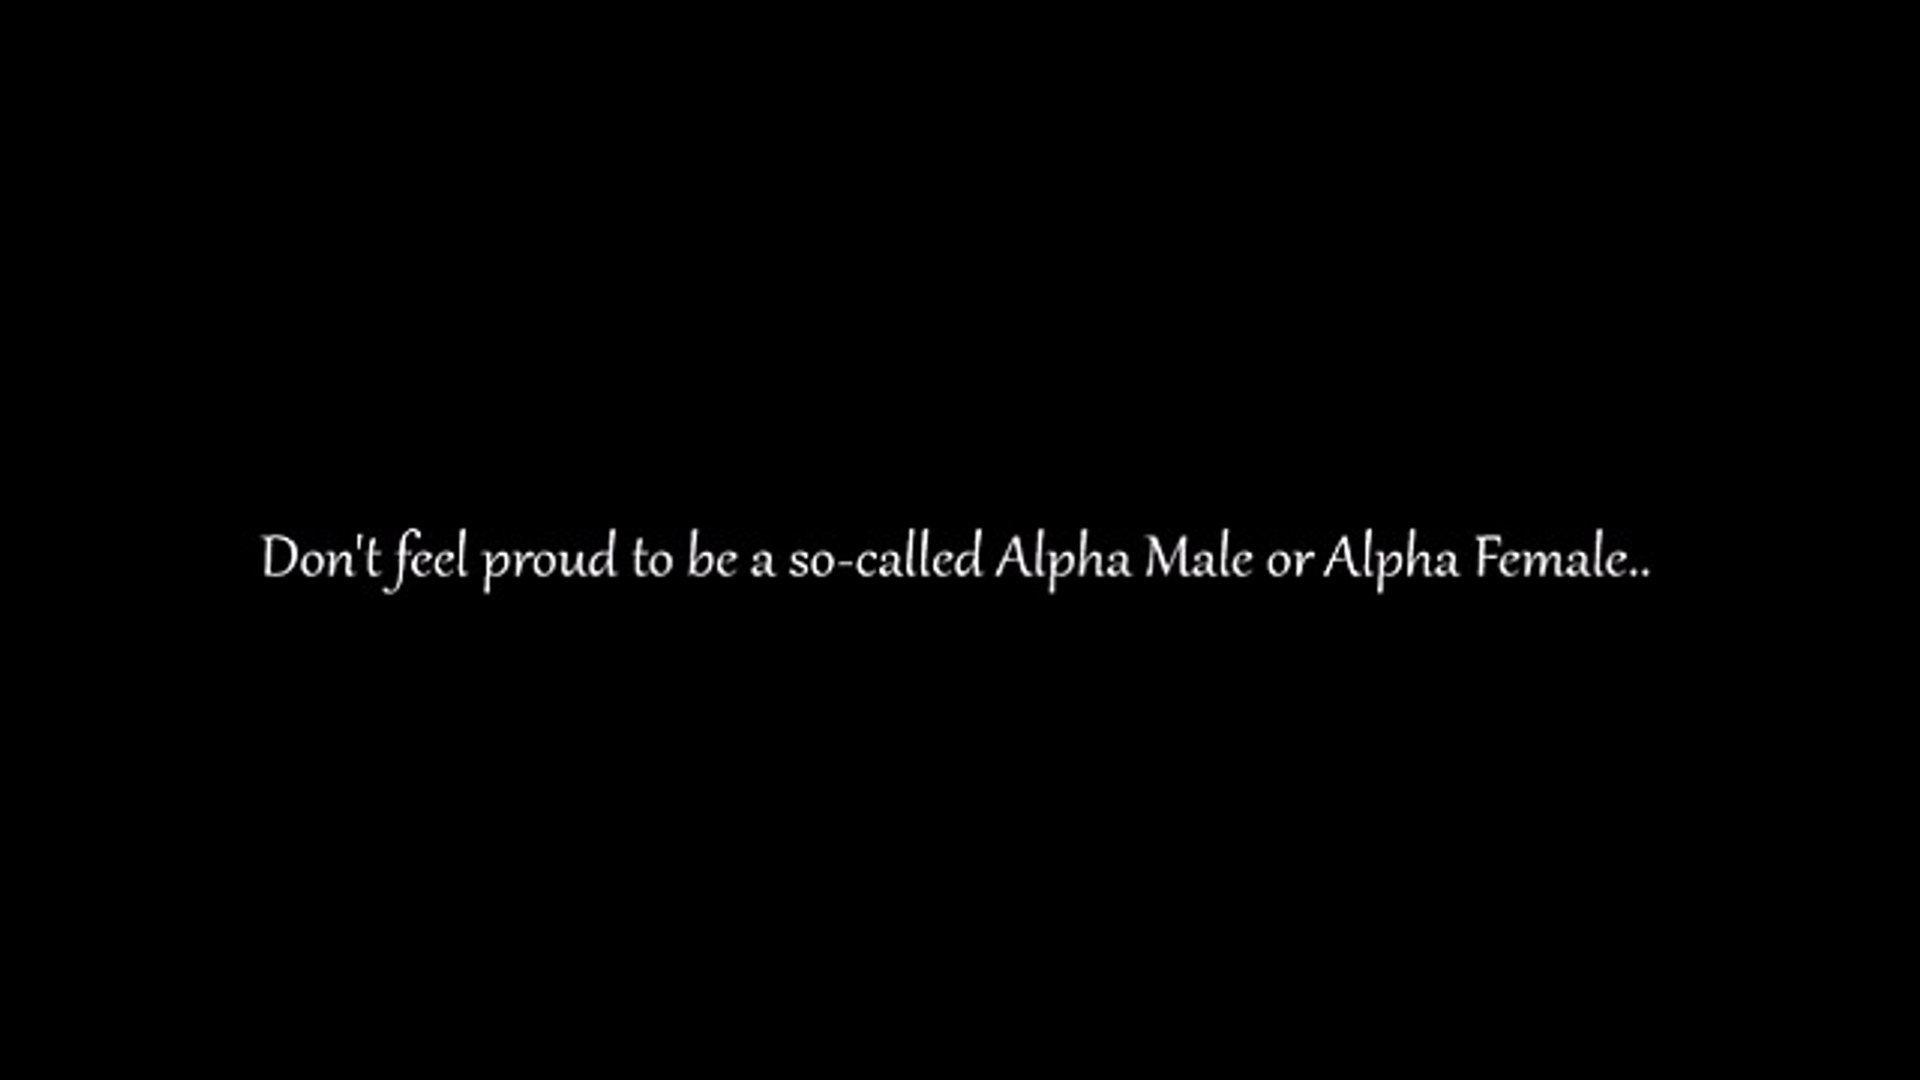 Don't Feel Proud To Be An Alpha Male Or Alpha Female